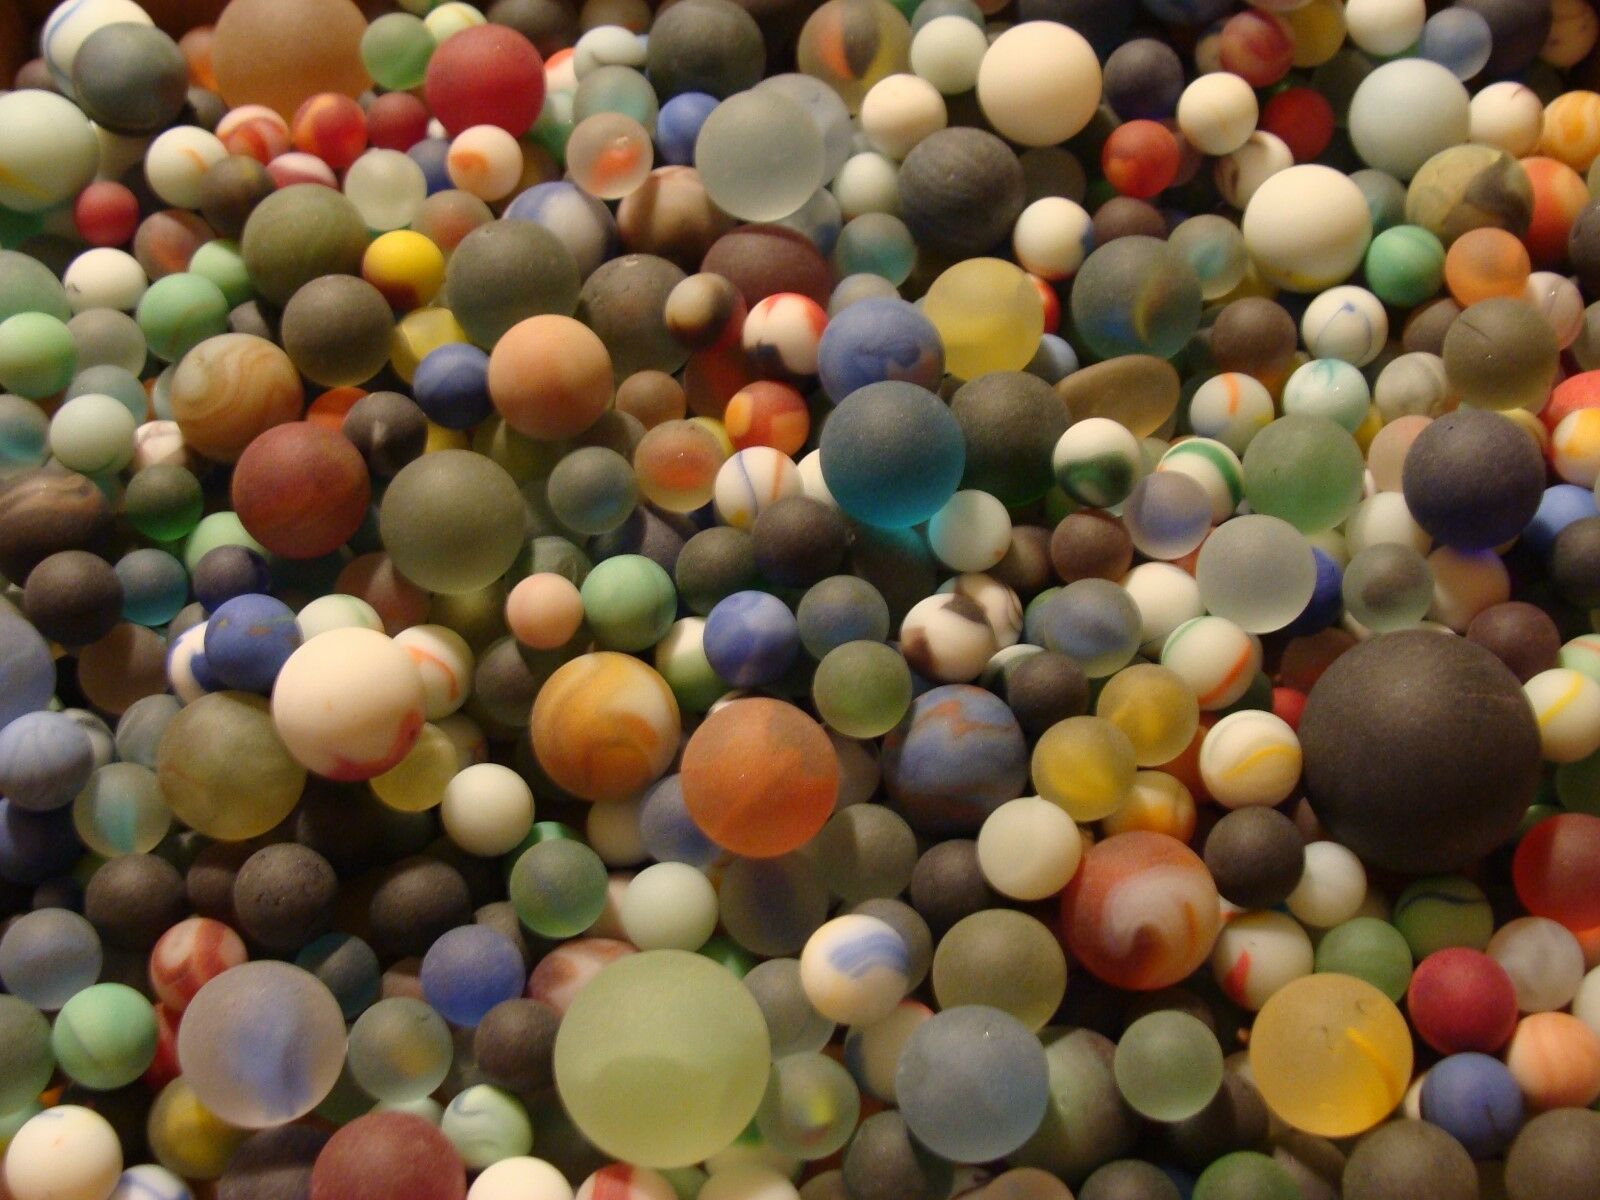 100 Vintage Glass Beach Sea Frosted Marbles Old Toys Gift Collect Free Ship